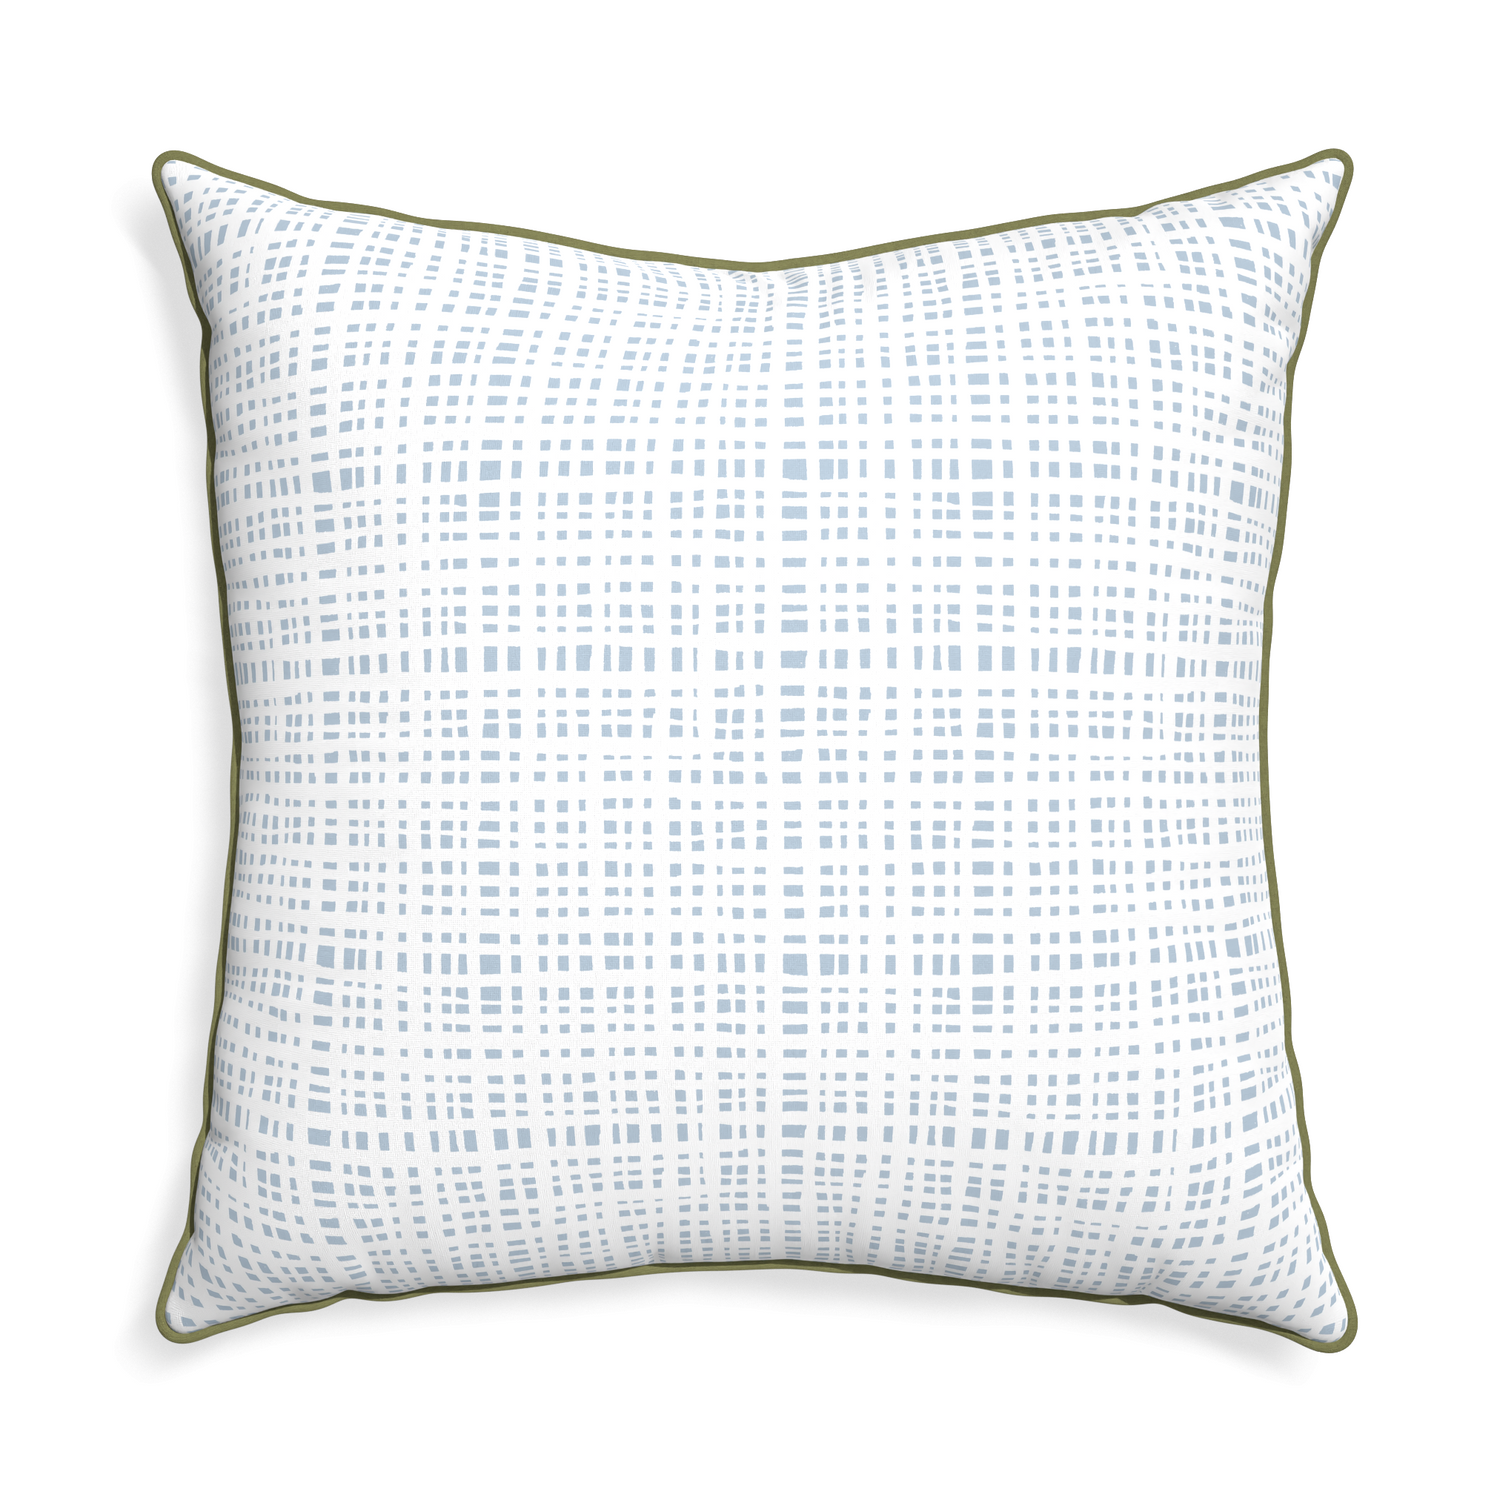 Euro-sham ginger sky custom pillow with moss piping on white background